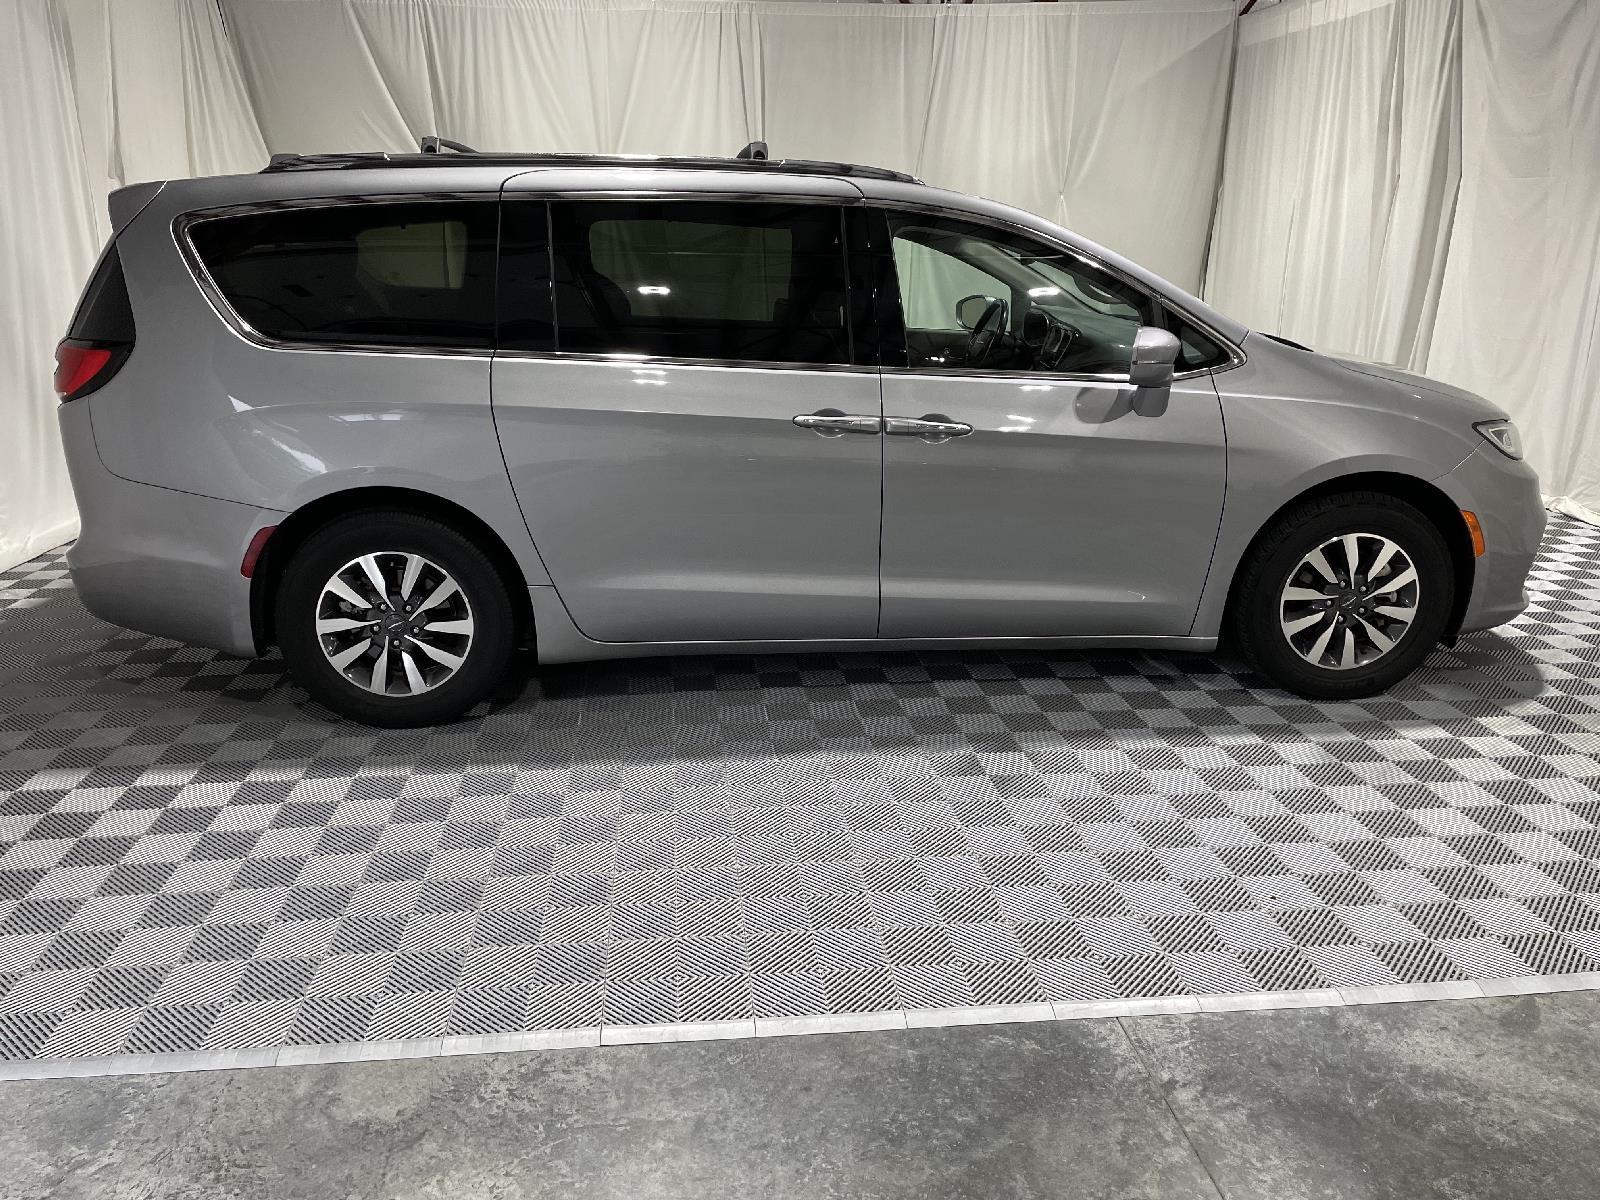 Used 2021 Chrysler Pacifica Touring L Minivans for sale in St Joseph MO